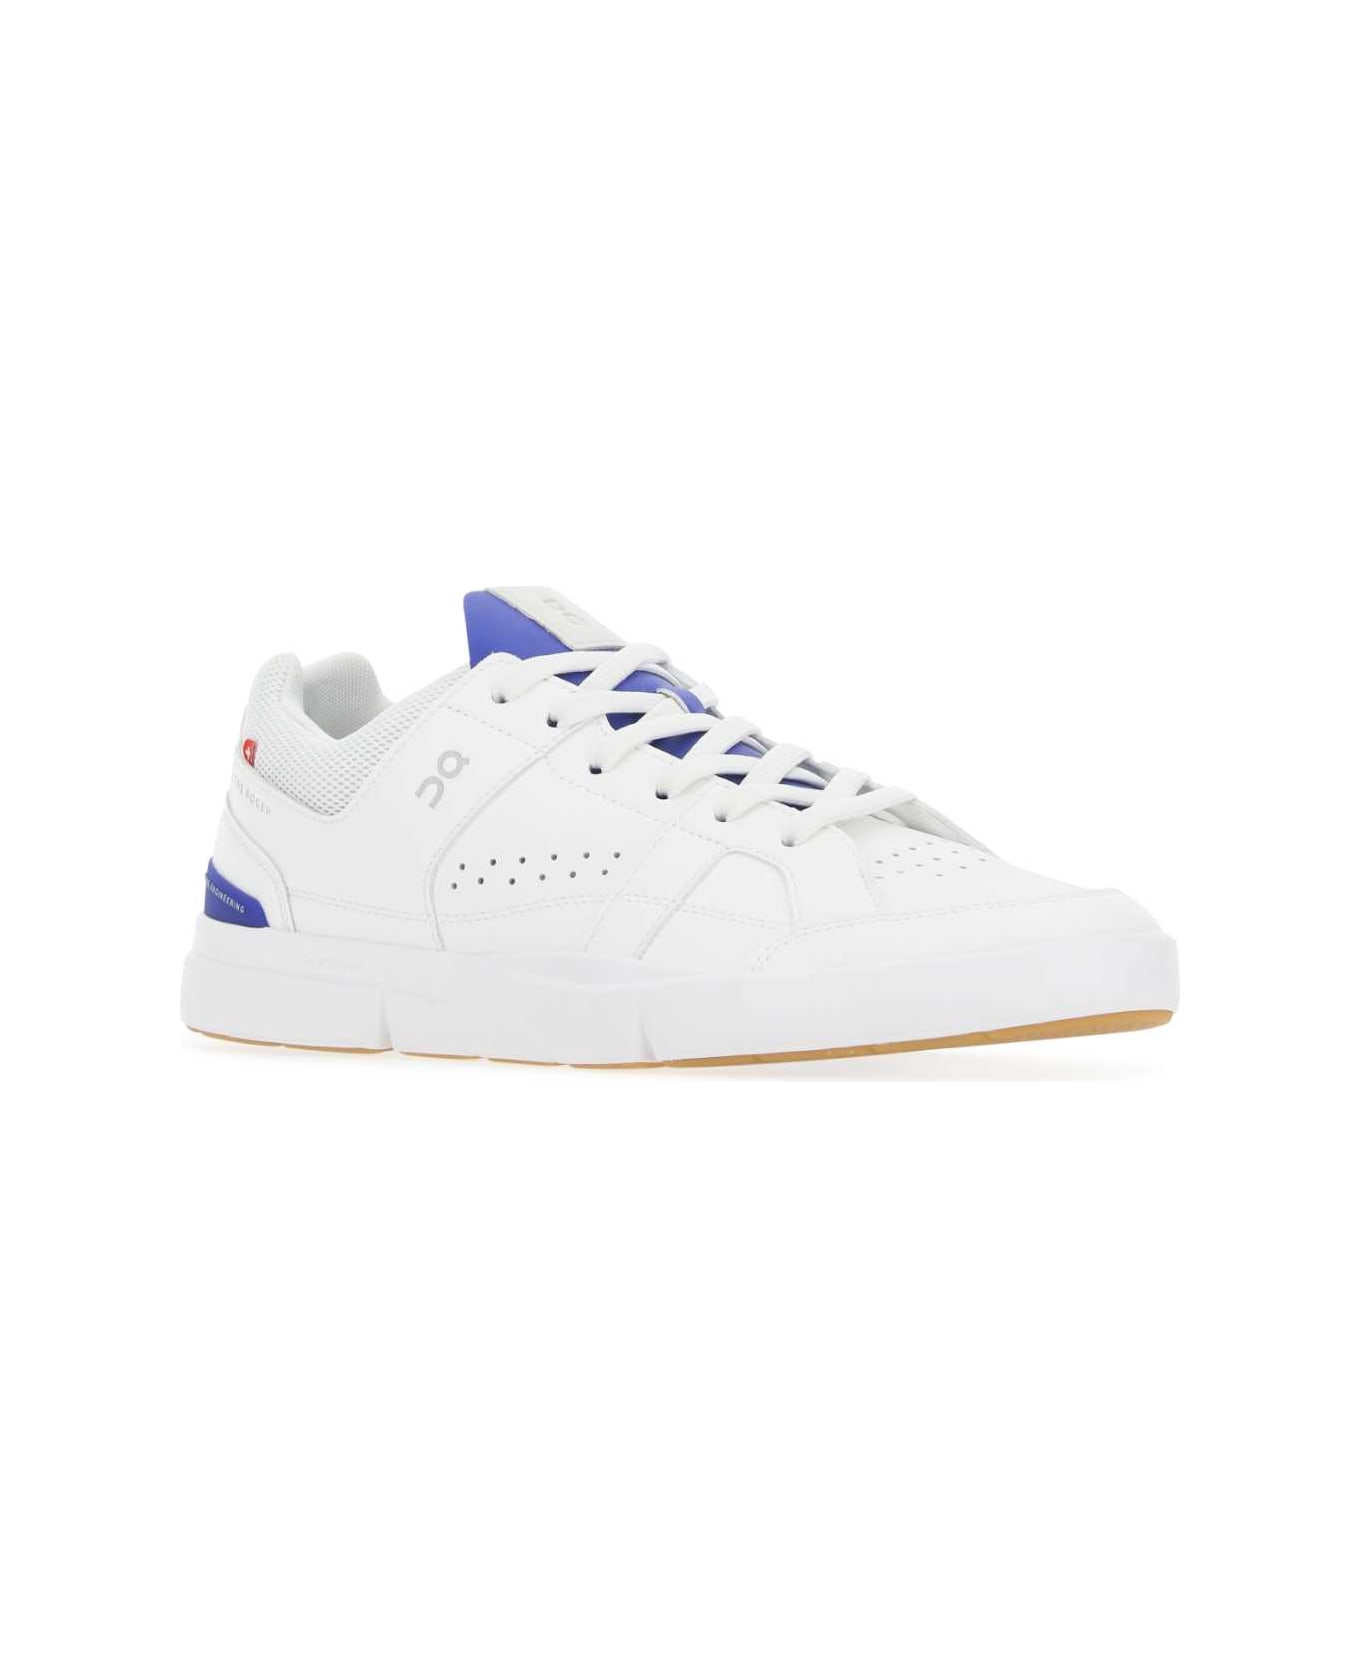 ON Two-tone Synthetic Leather And Fabric The Roger Clubhouse Sneakers - WHIINDI